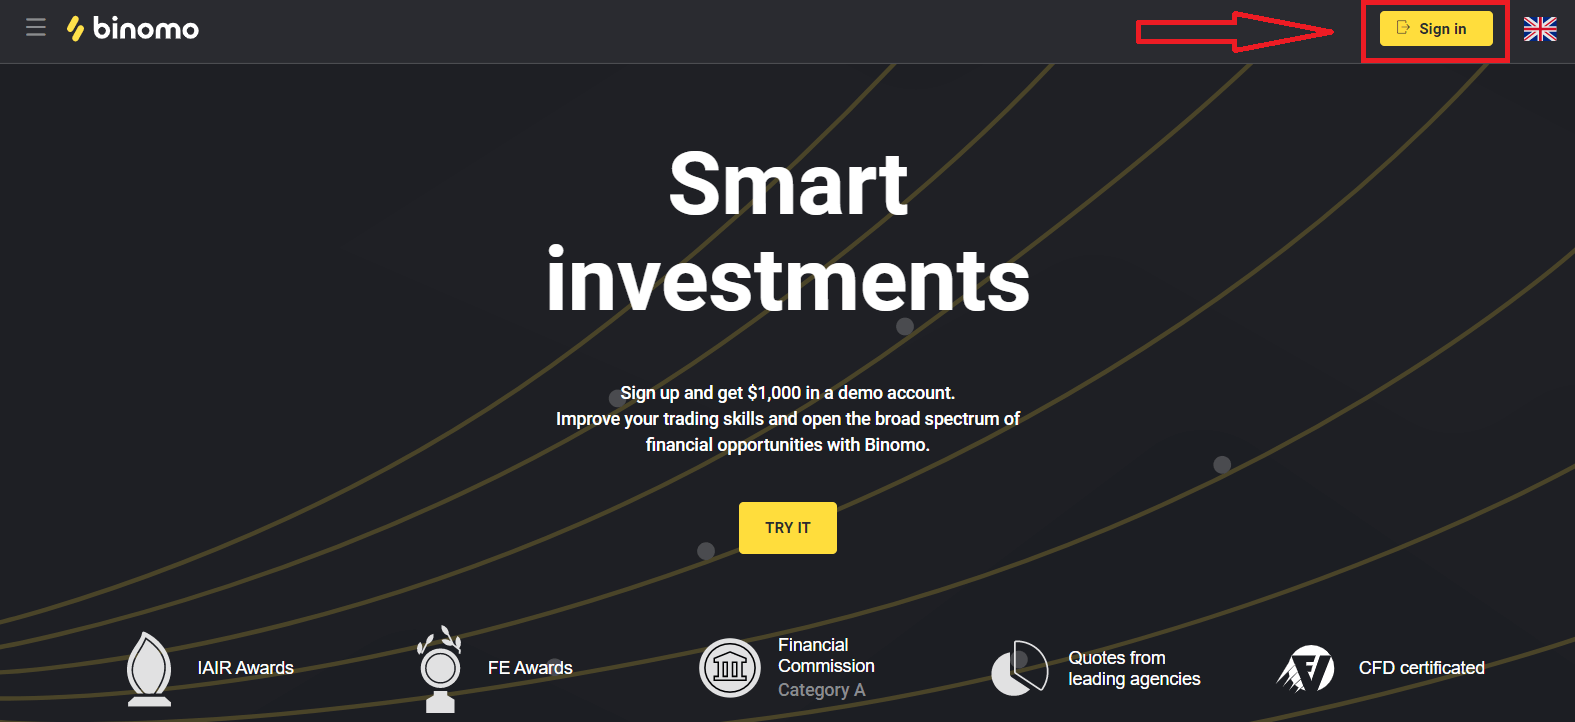 How to Start Binomo Trading in 2021: A Step-By-Step Guide for Beginners